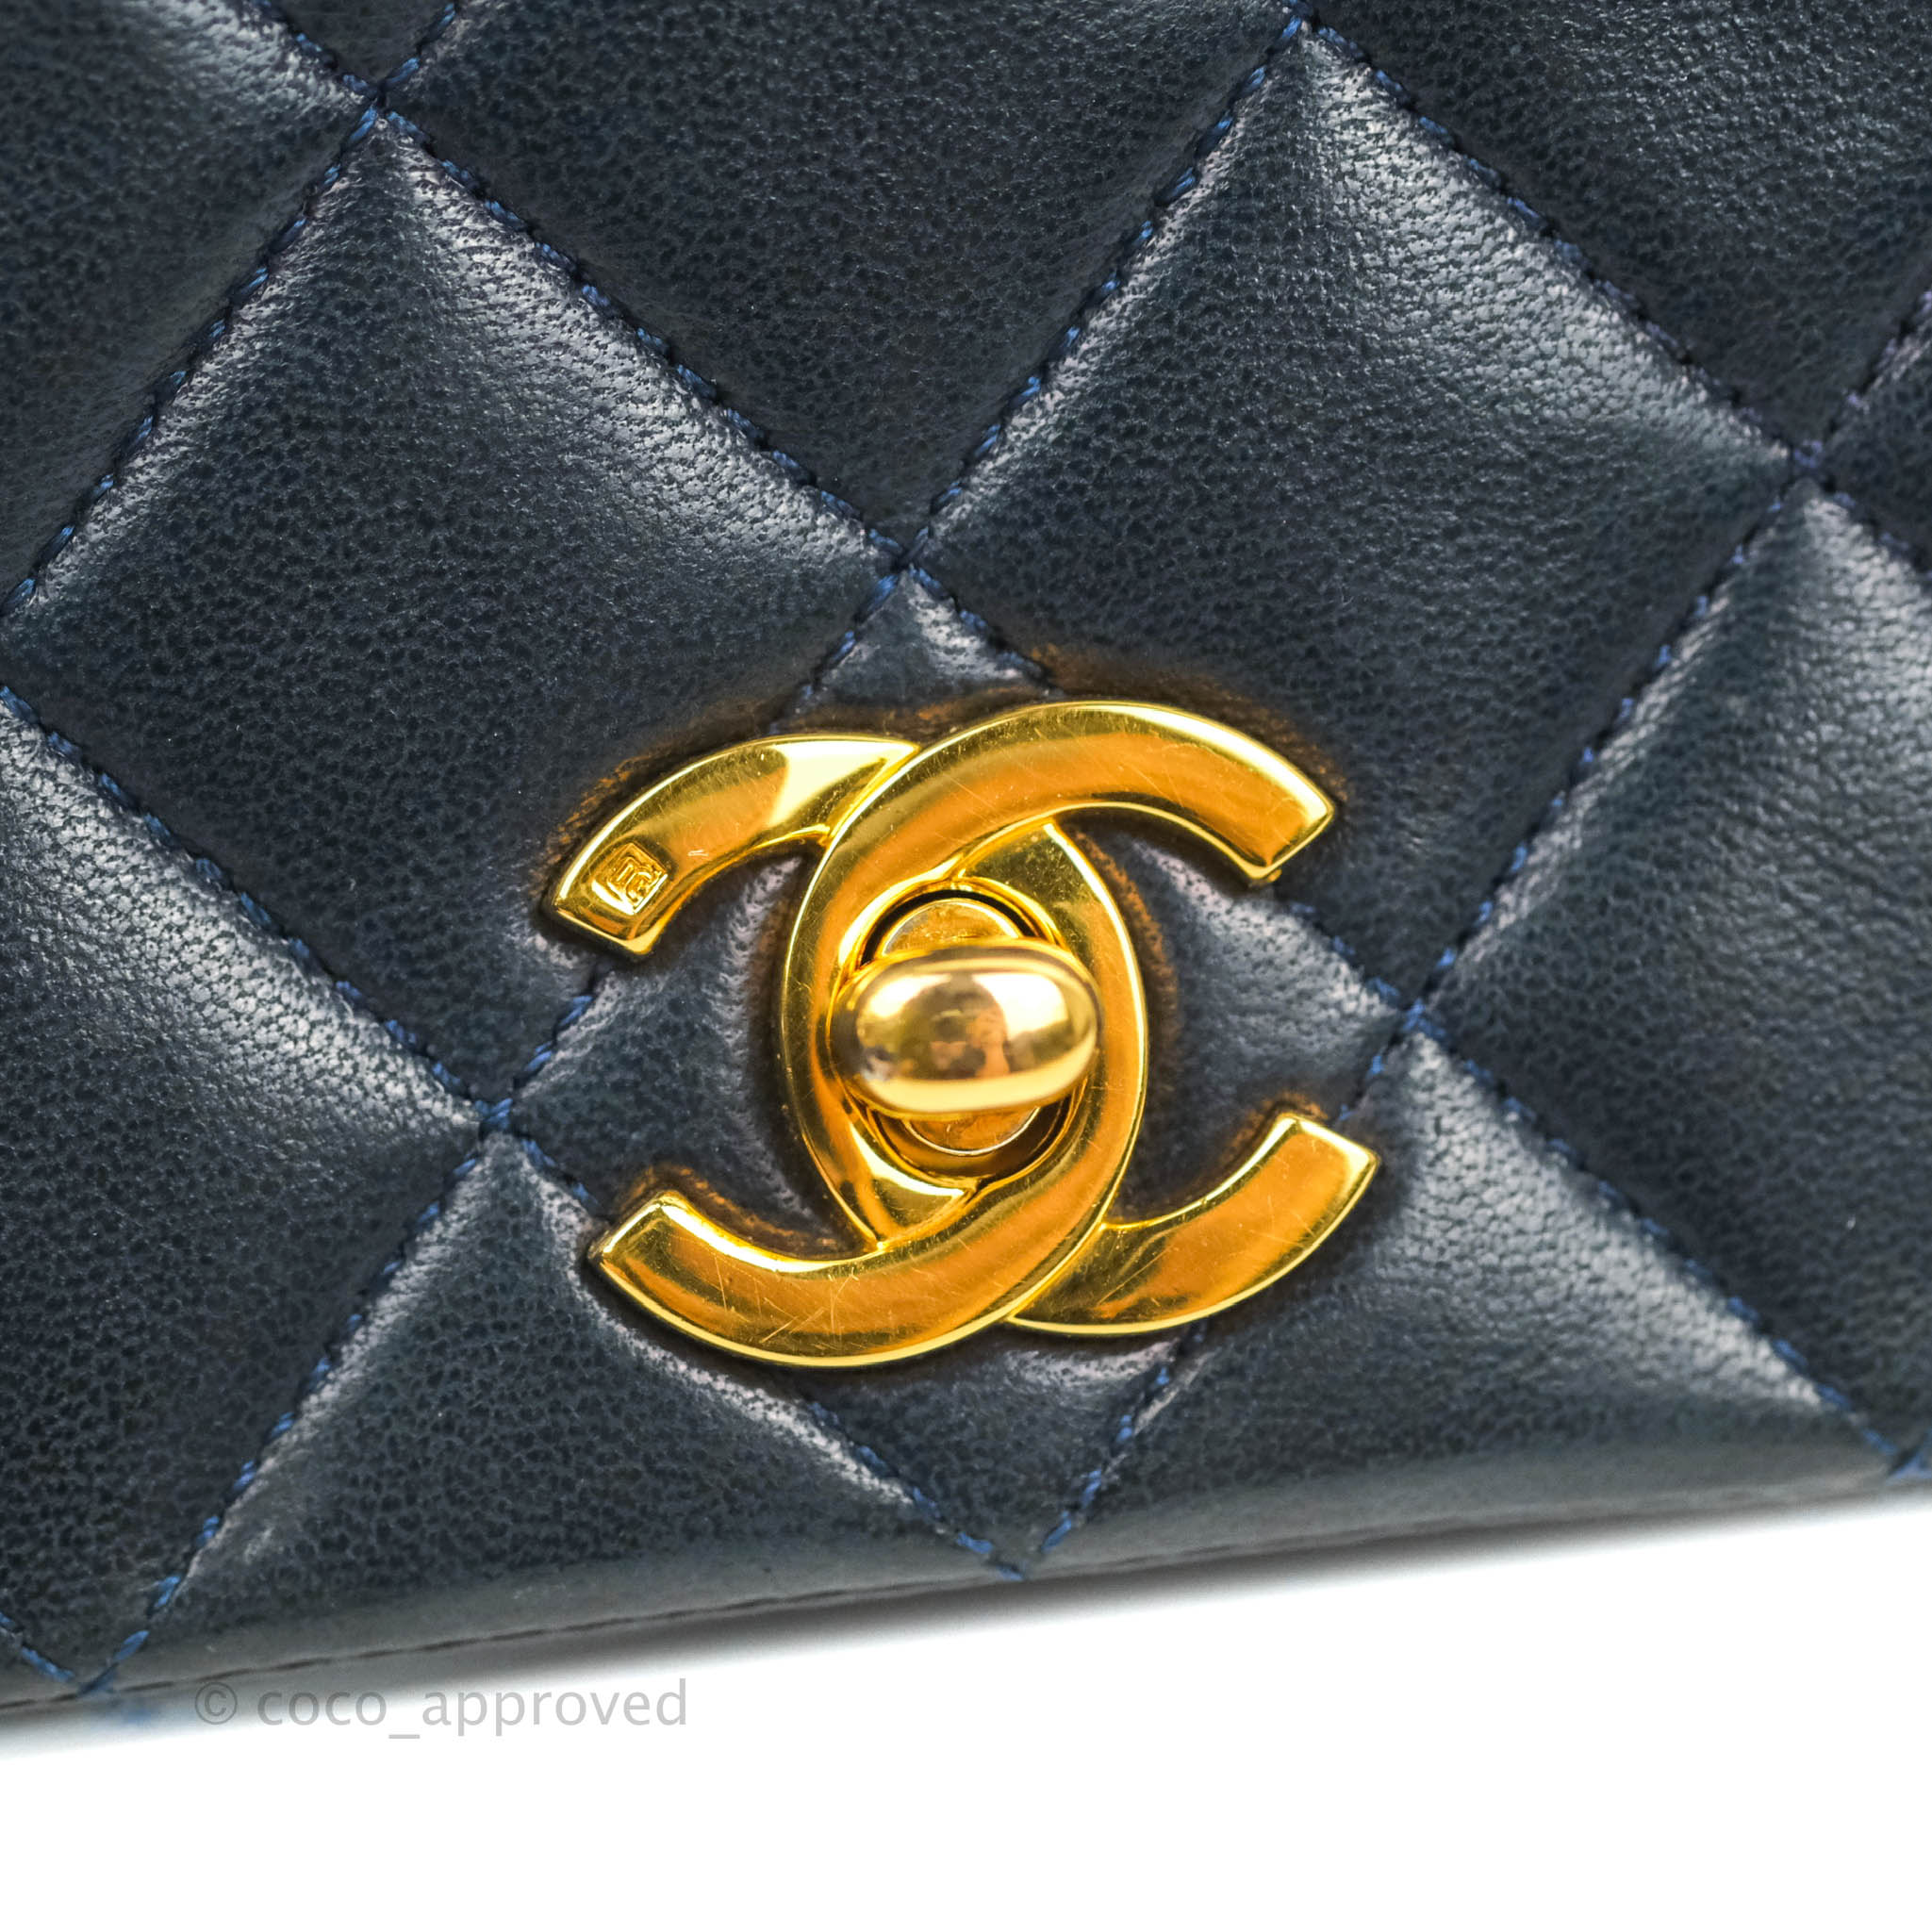 CHANEL, Bags, Vintage Chanel Lamb Skin Mini Purse With Chain 6s 70s